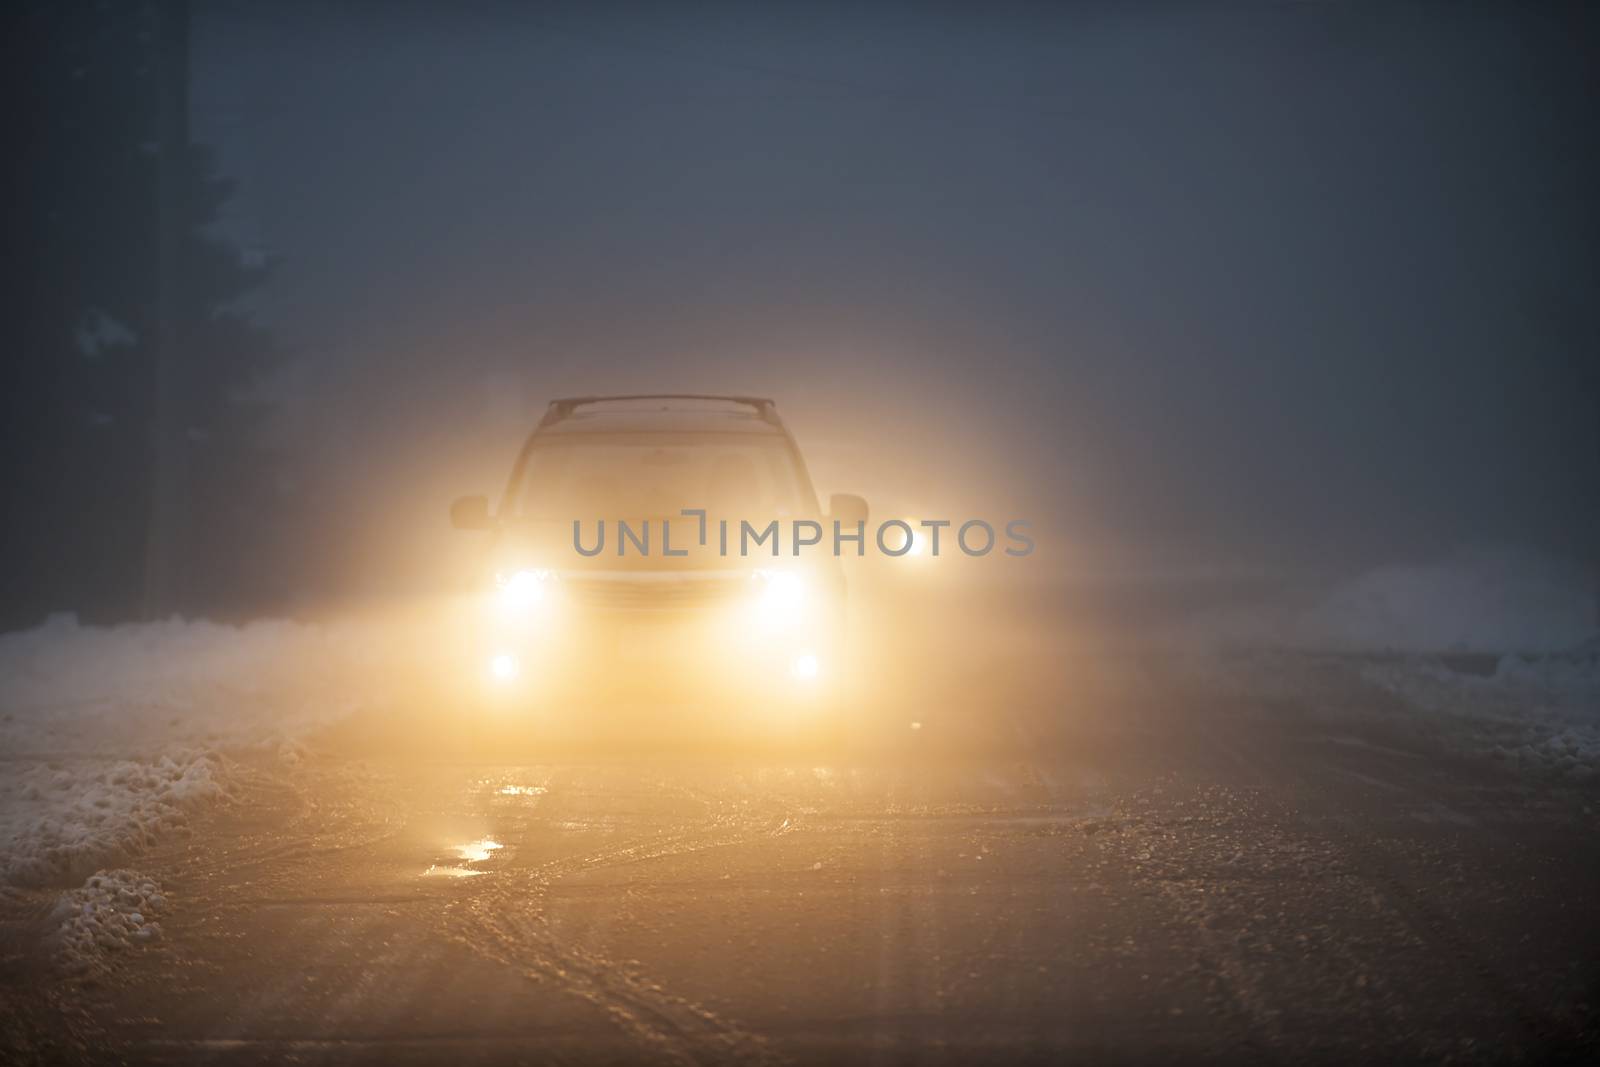 Bright headlights of a car driving on foggy winter road